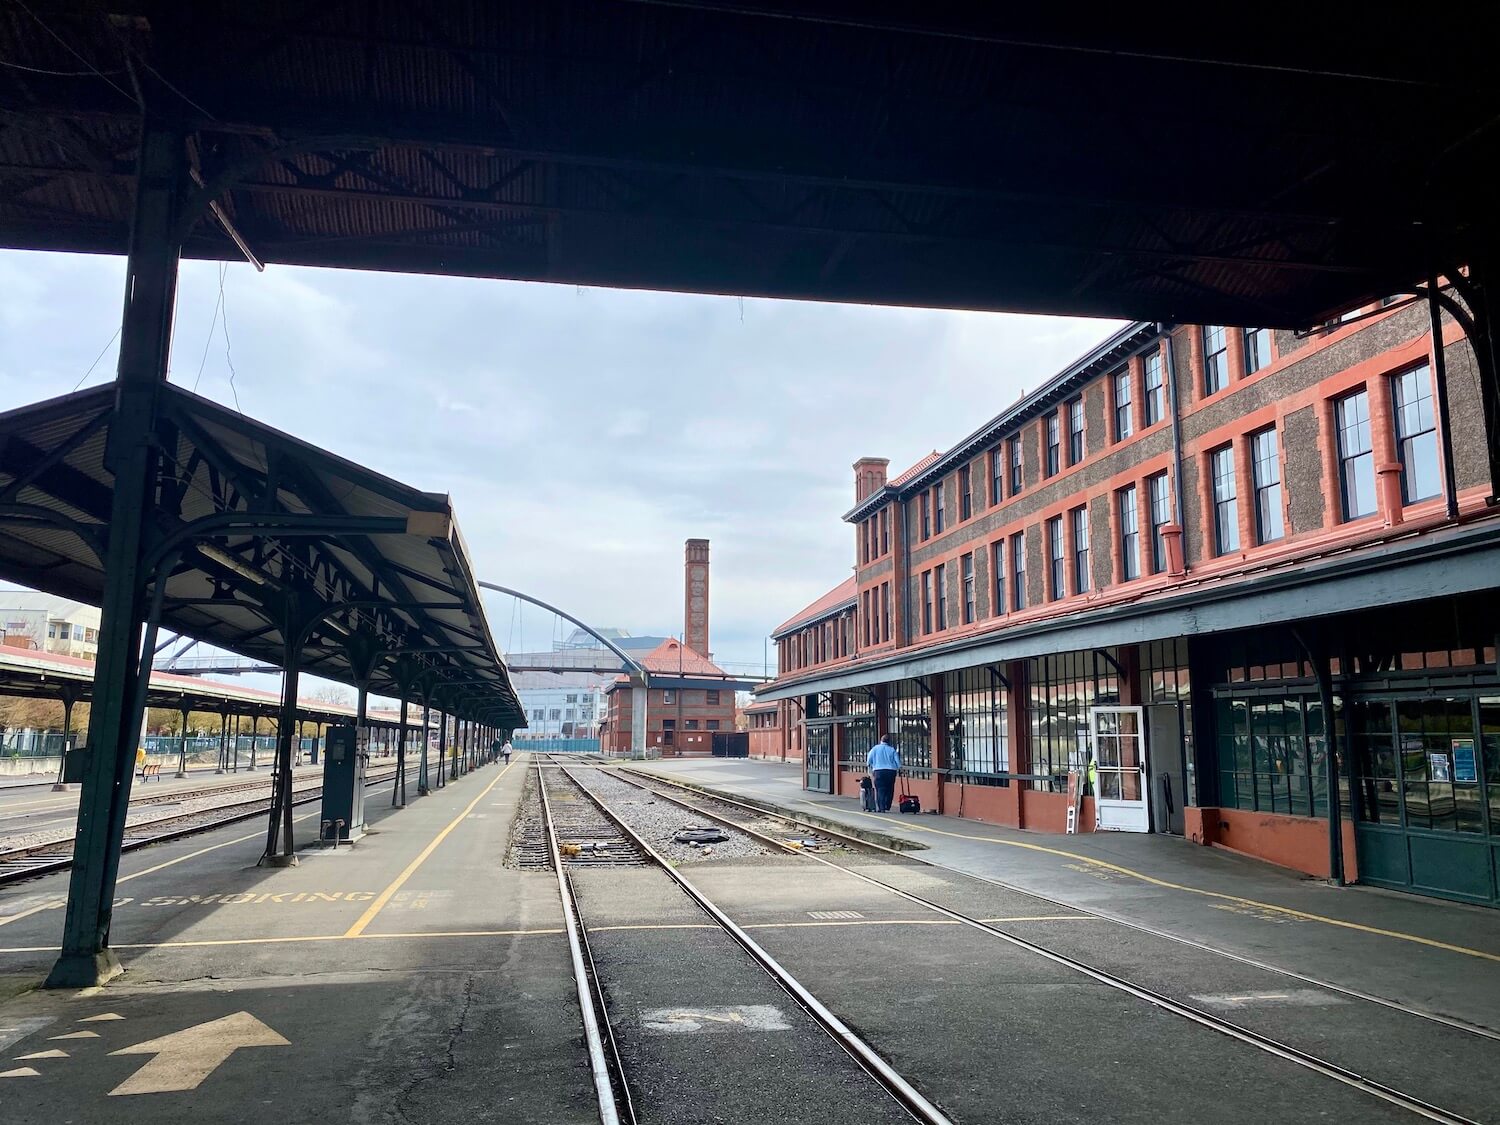 This photo shows a train from Seattle arriving in Portland at Union Station. The famous red brick building can be seen from under a dark overhang shelter where the train tracks roll through the station.